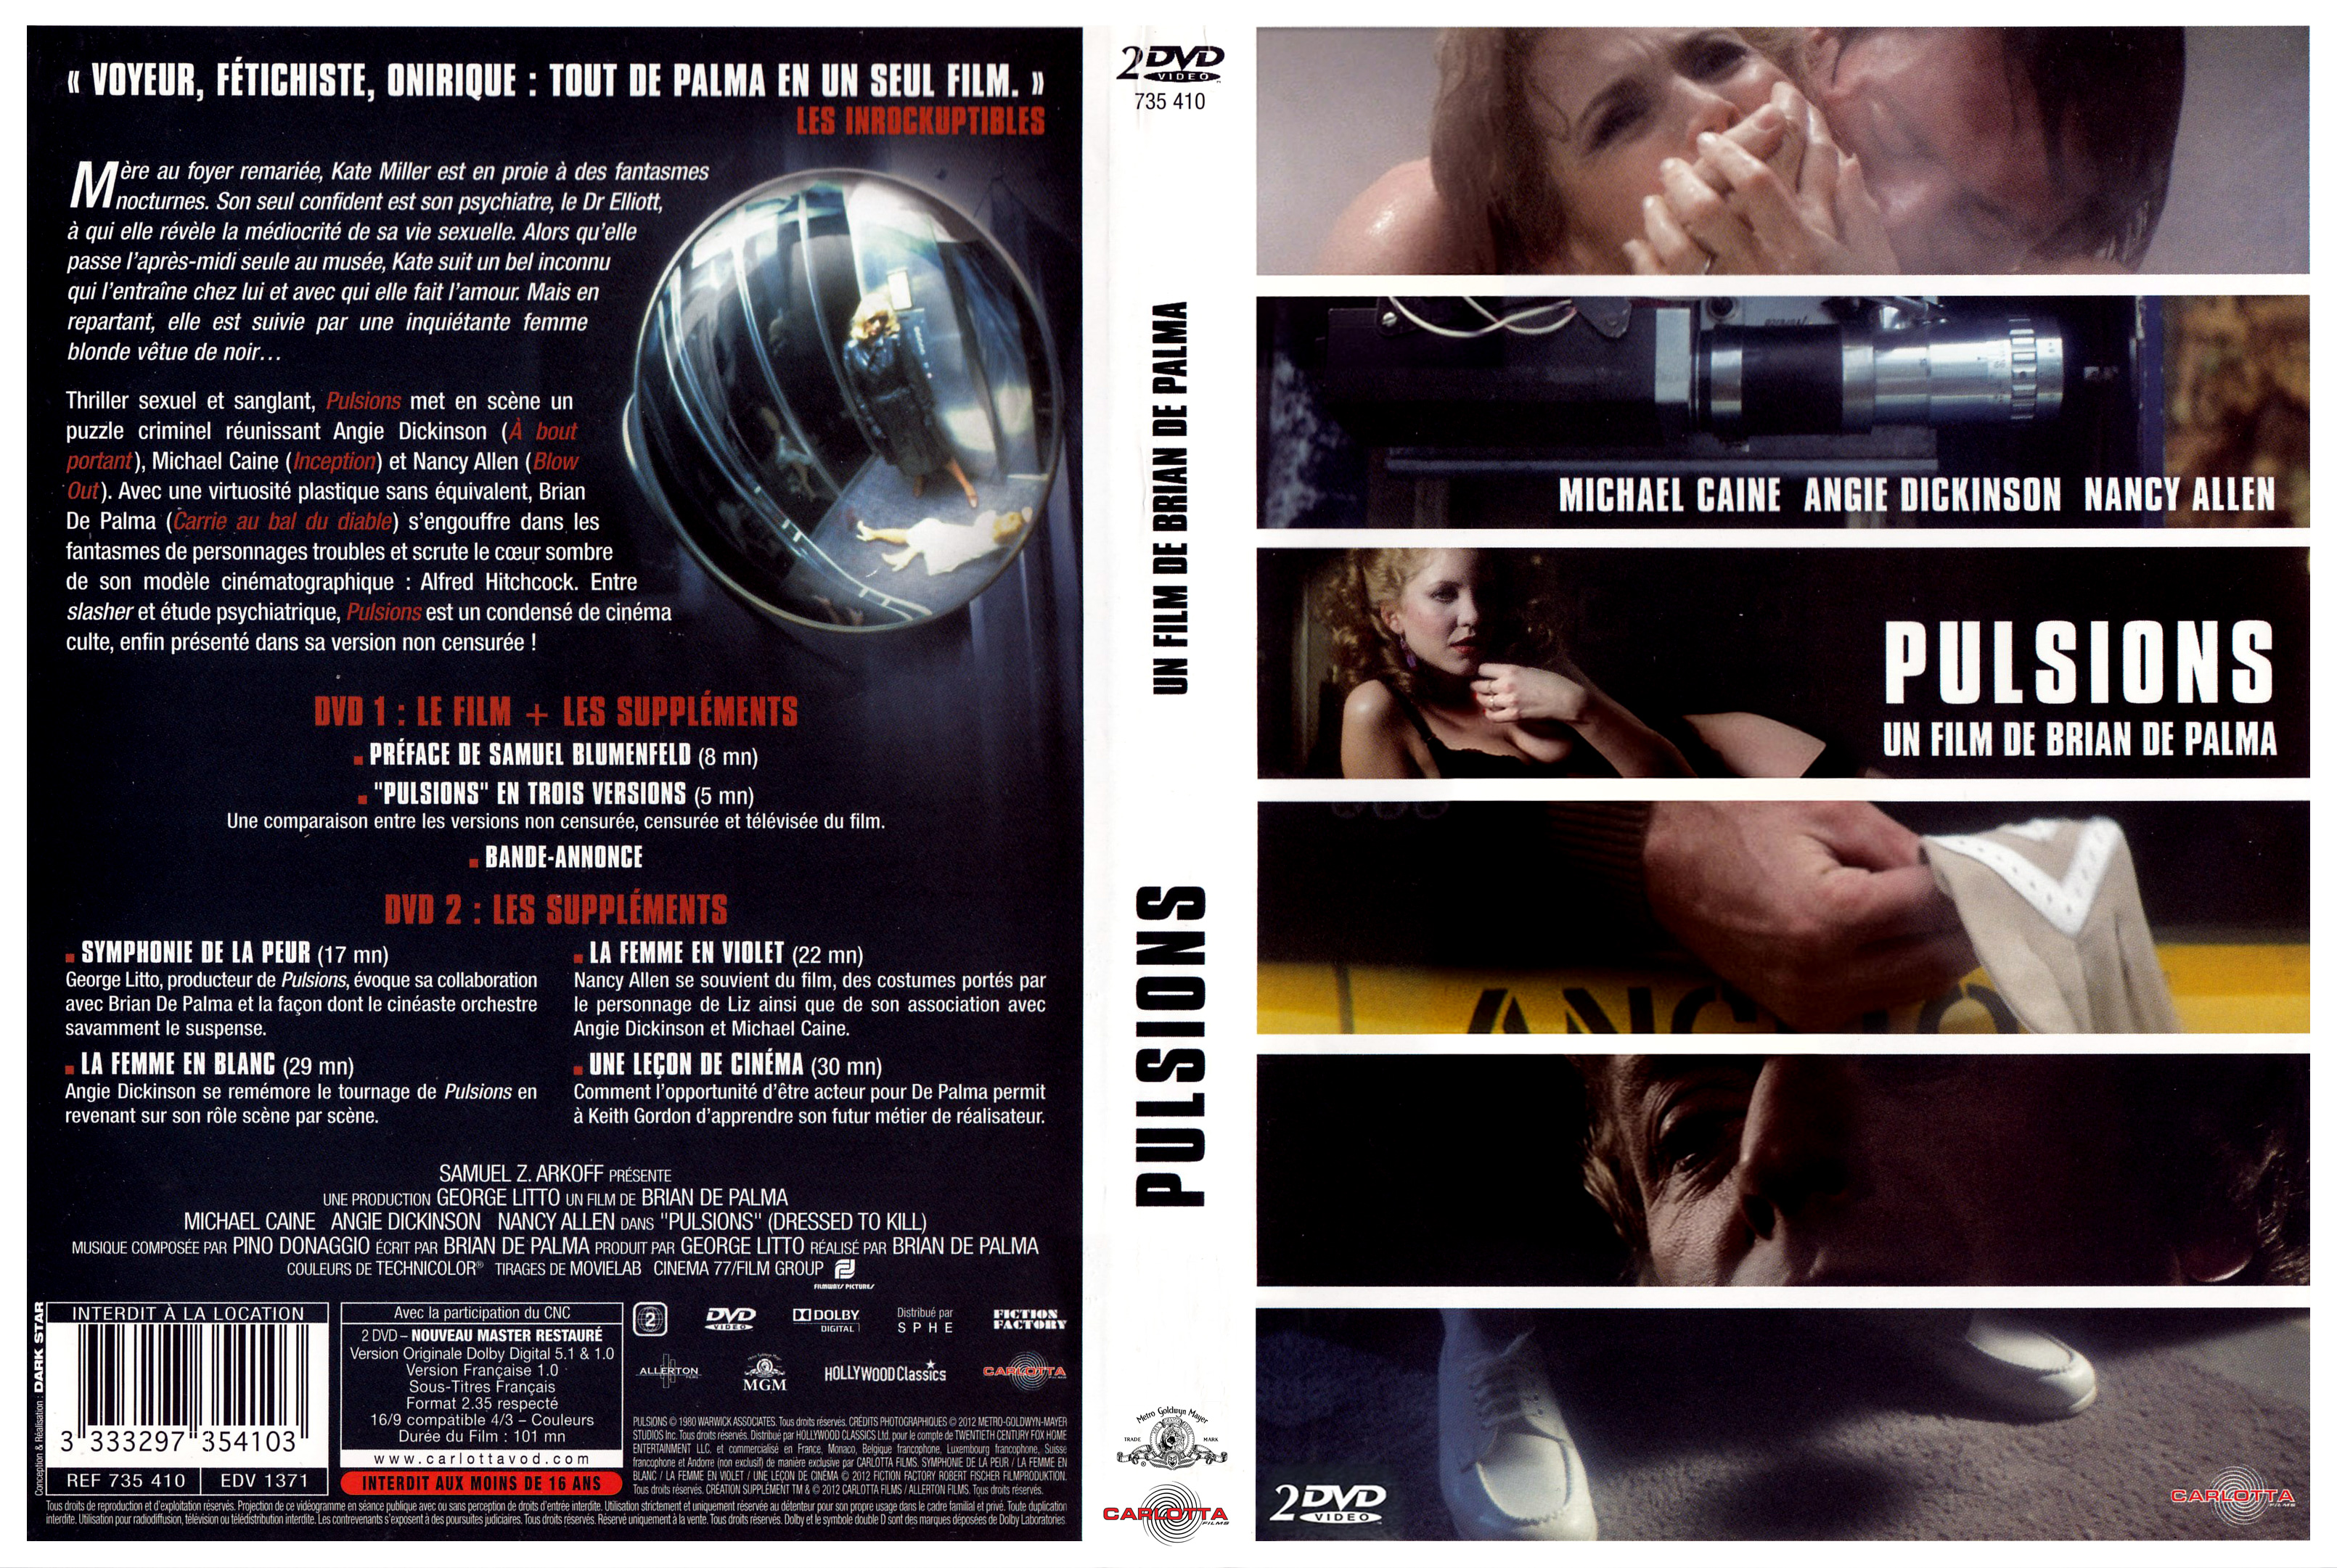 Jaquette DVD Pulsions